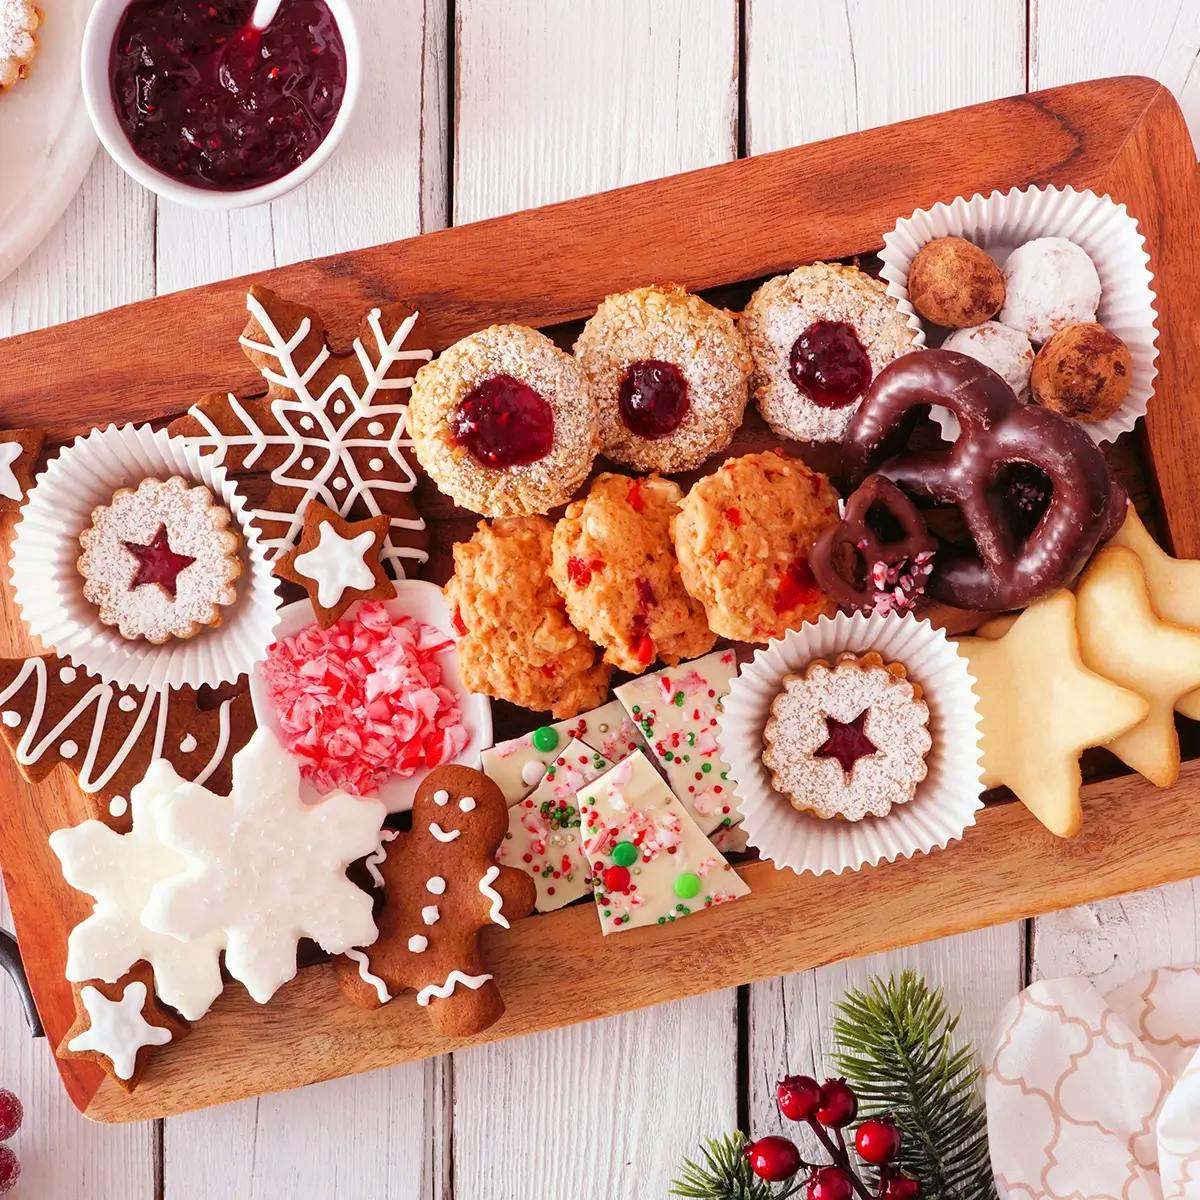 A Christmas dessert charcuterie board with cookies, gingerbread men, and cakes.